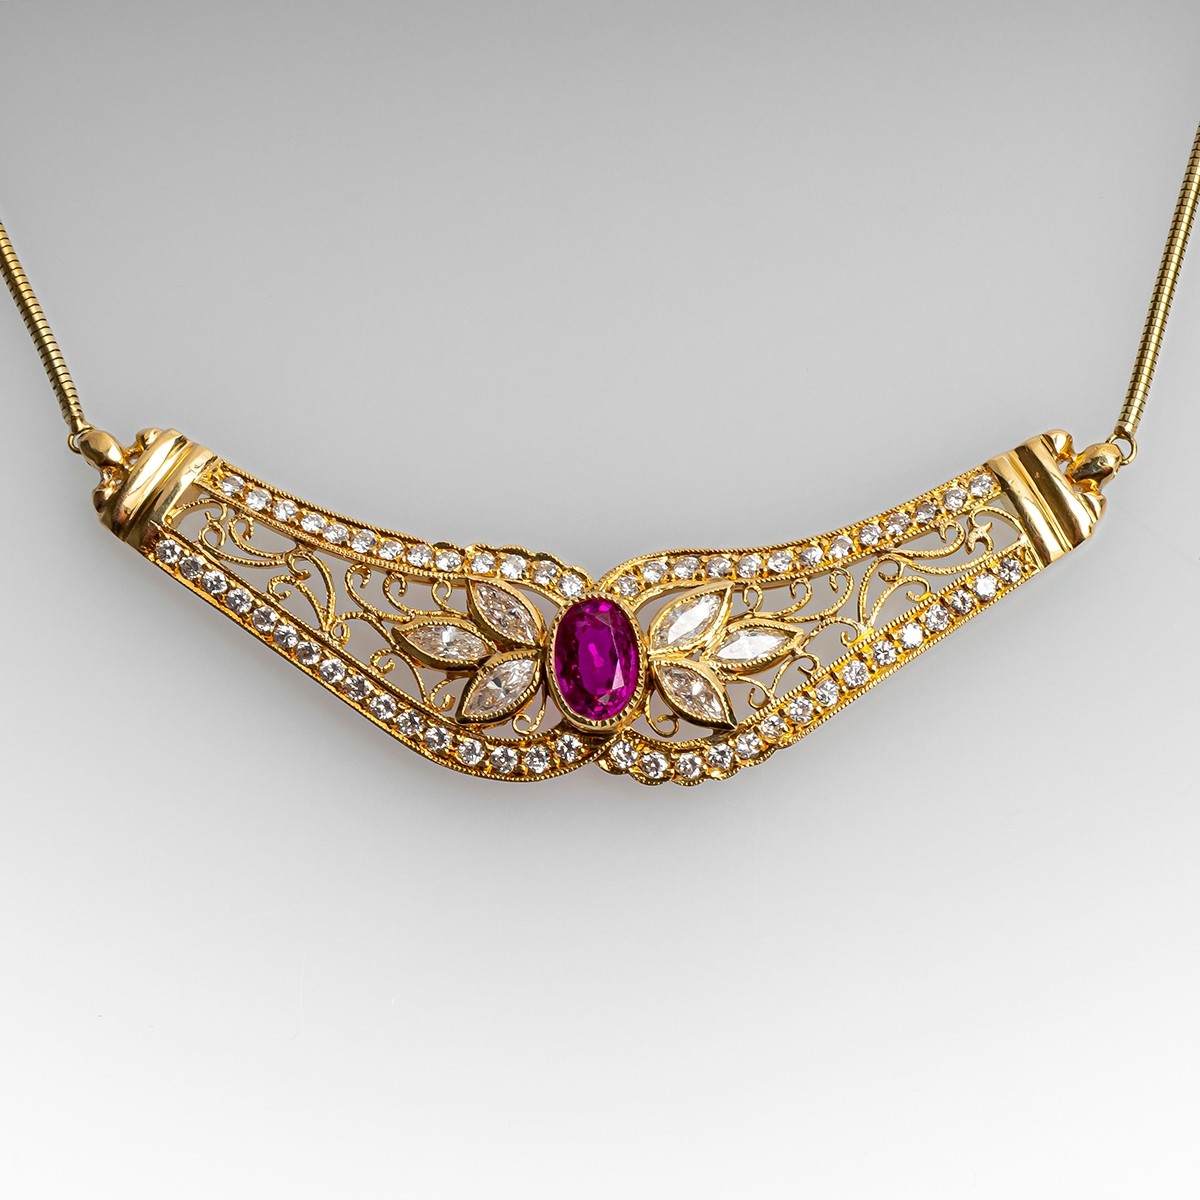 Chaumet 18K Yellow Gold Estate Ruby Necklace, Paris – Long's Jewelers